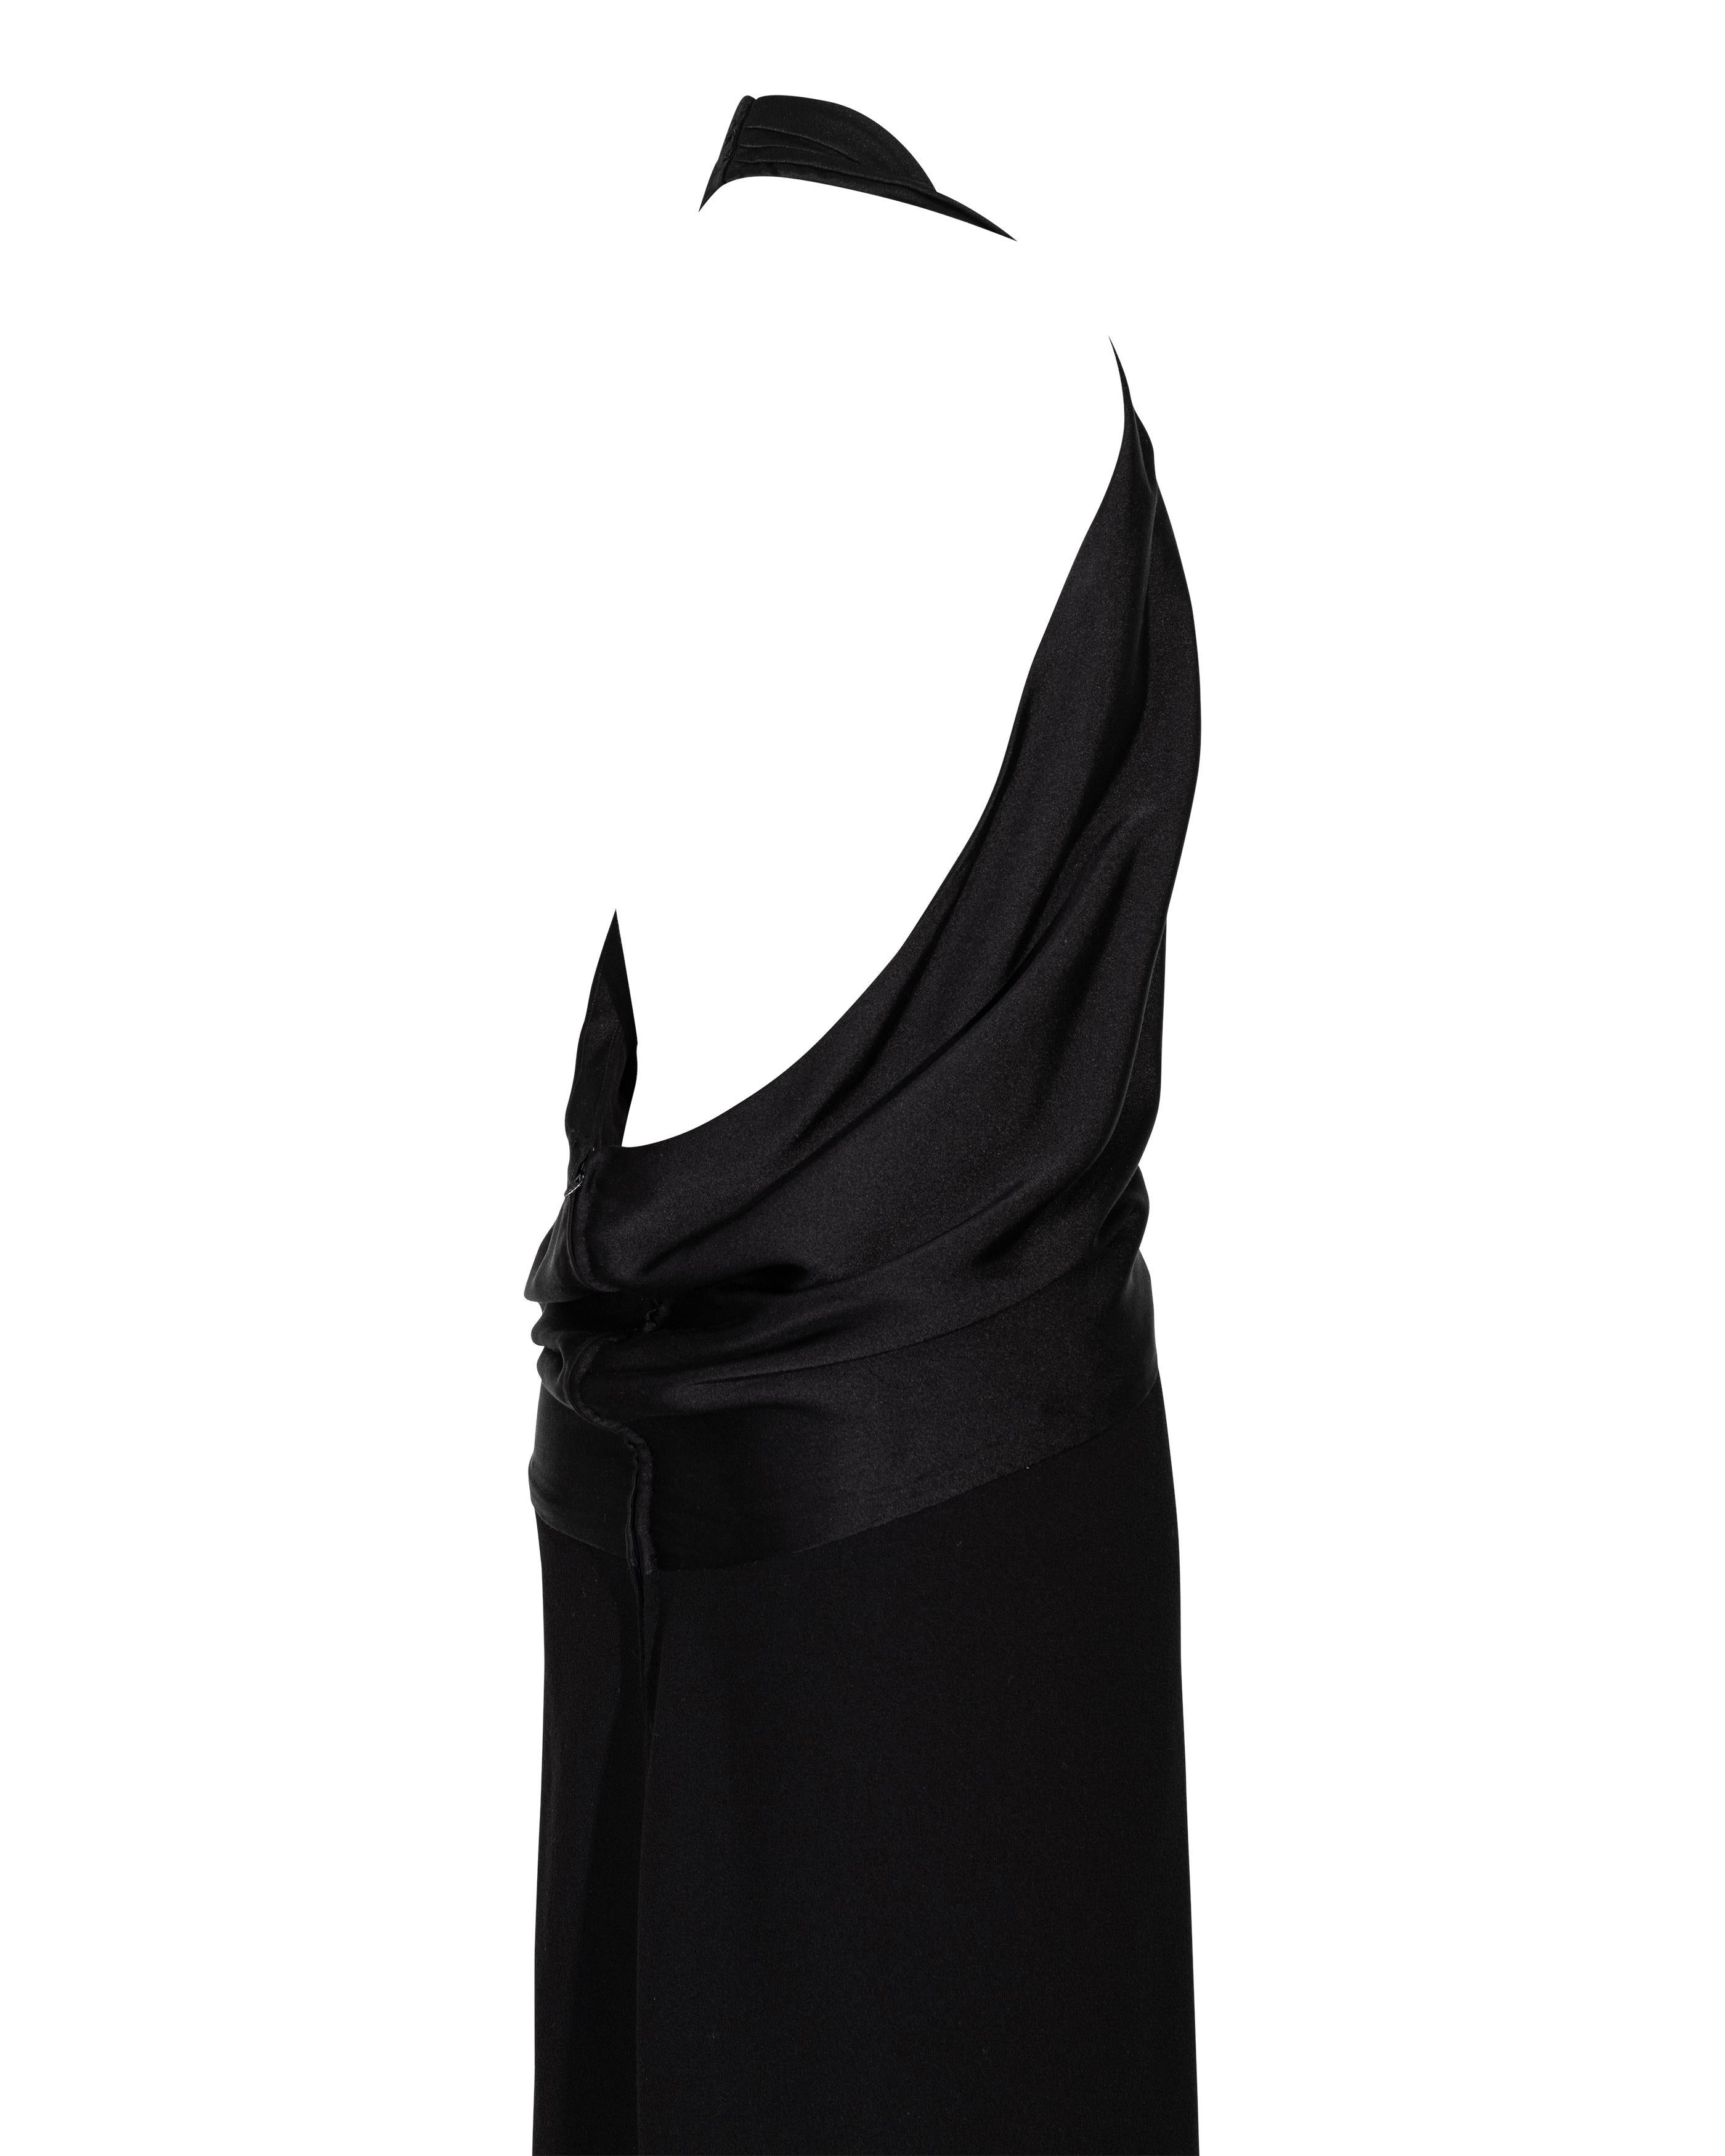 1982 James Galanos Black Gown with Open Back 1